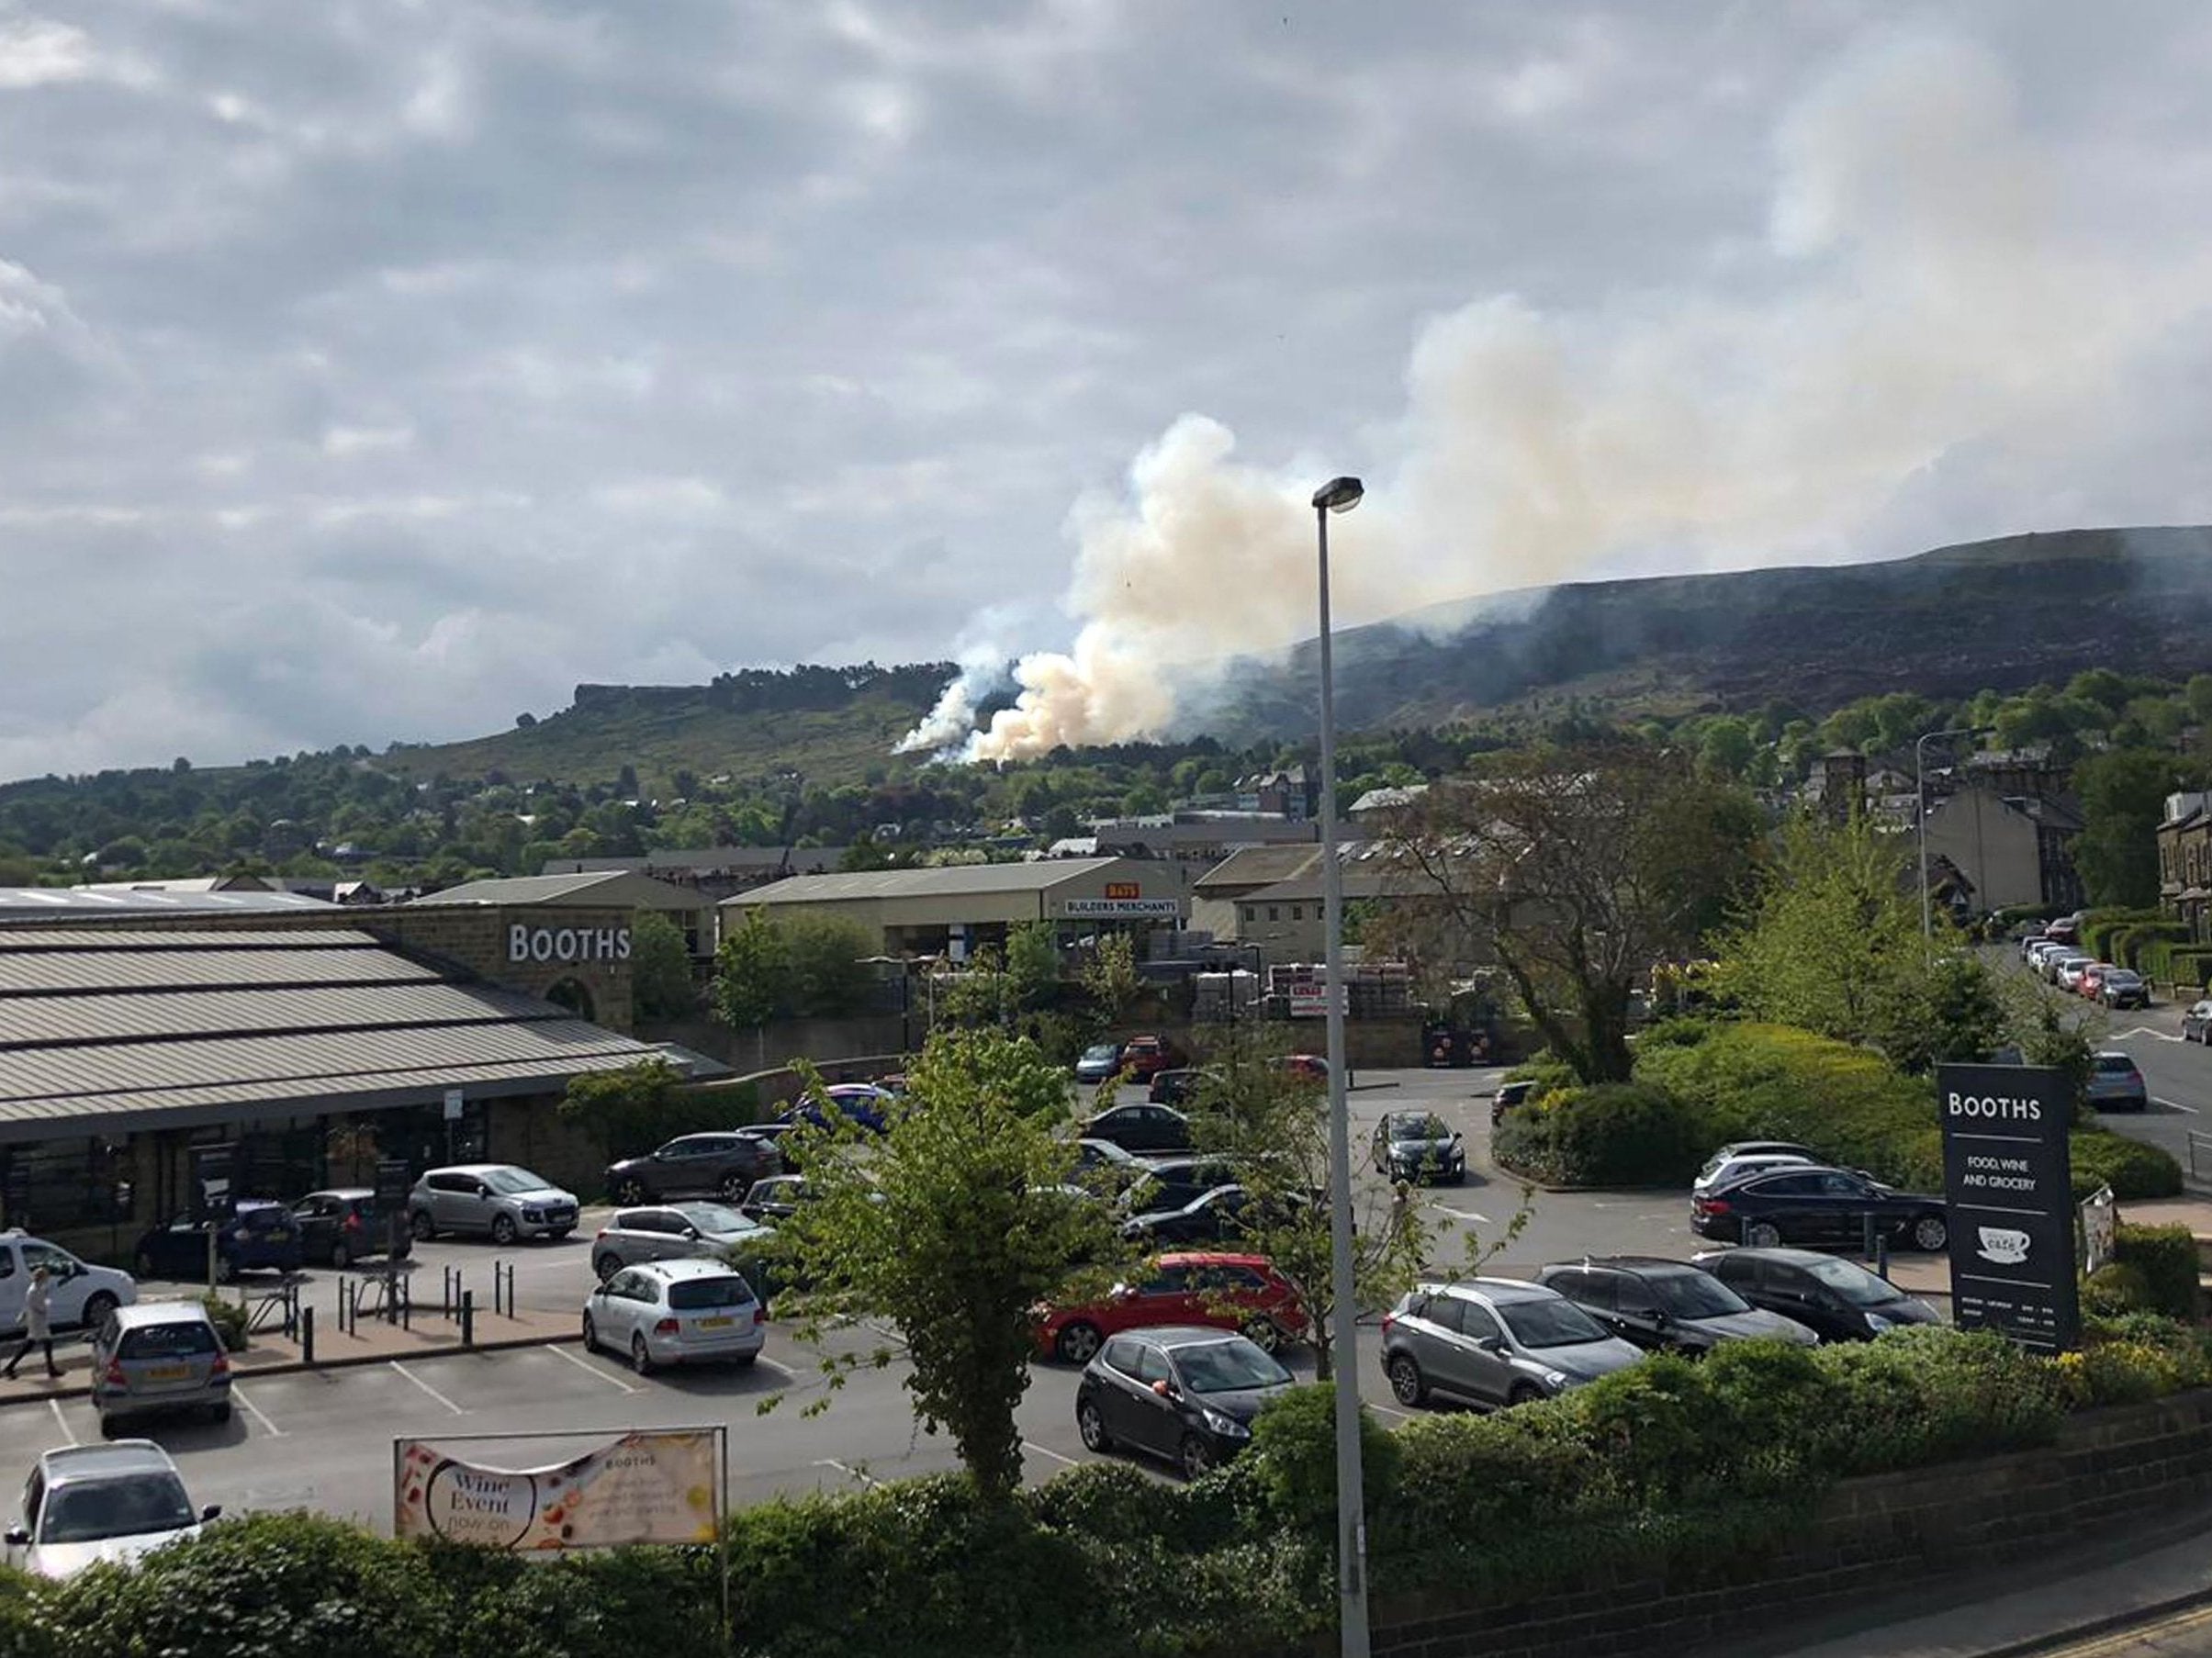 Smoke rises from Ilkley Moor during the second blaze in a month